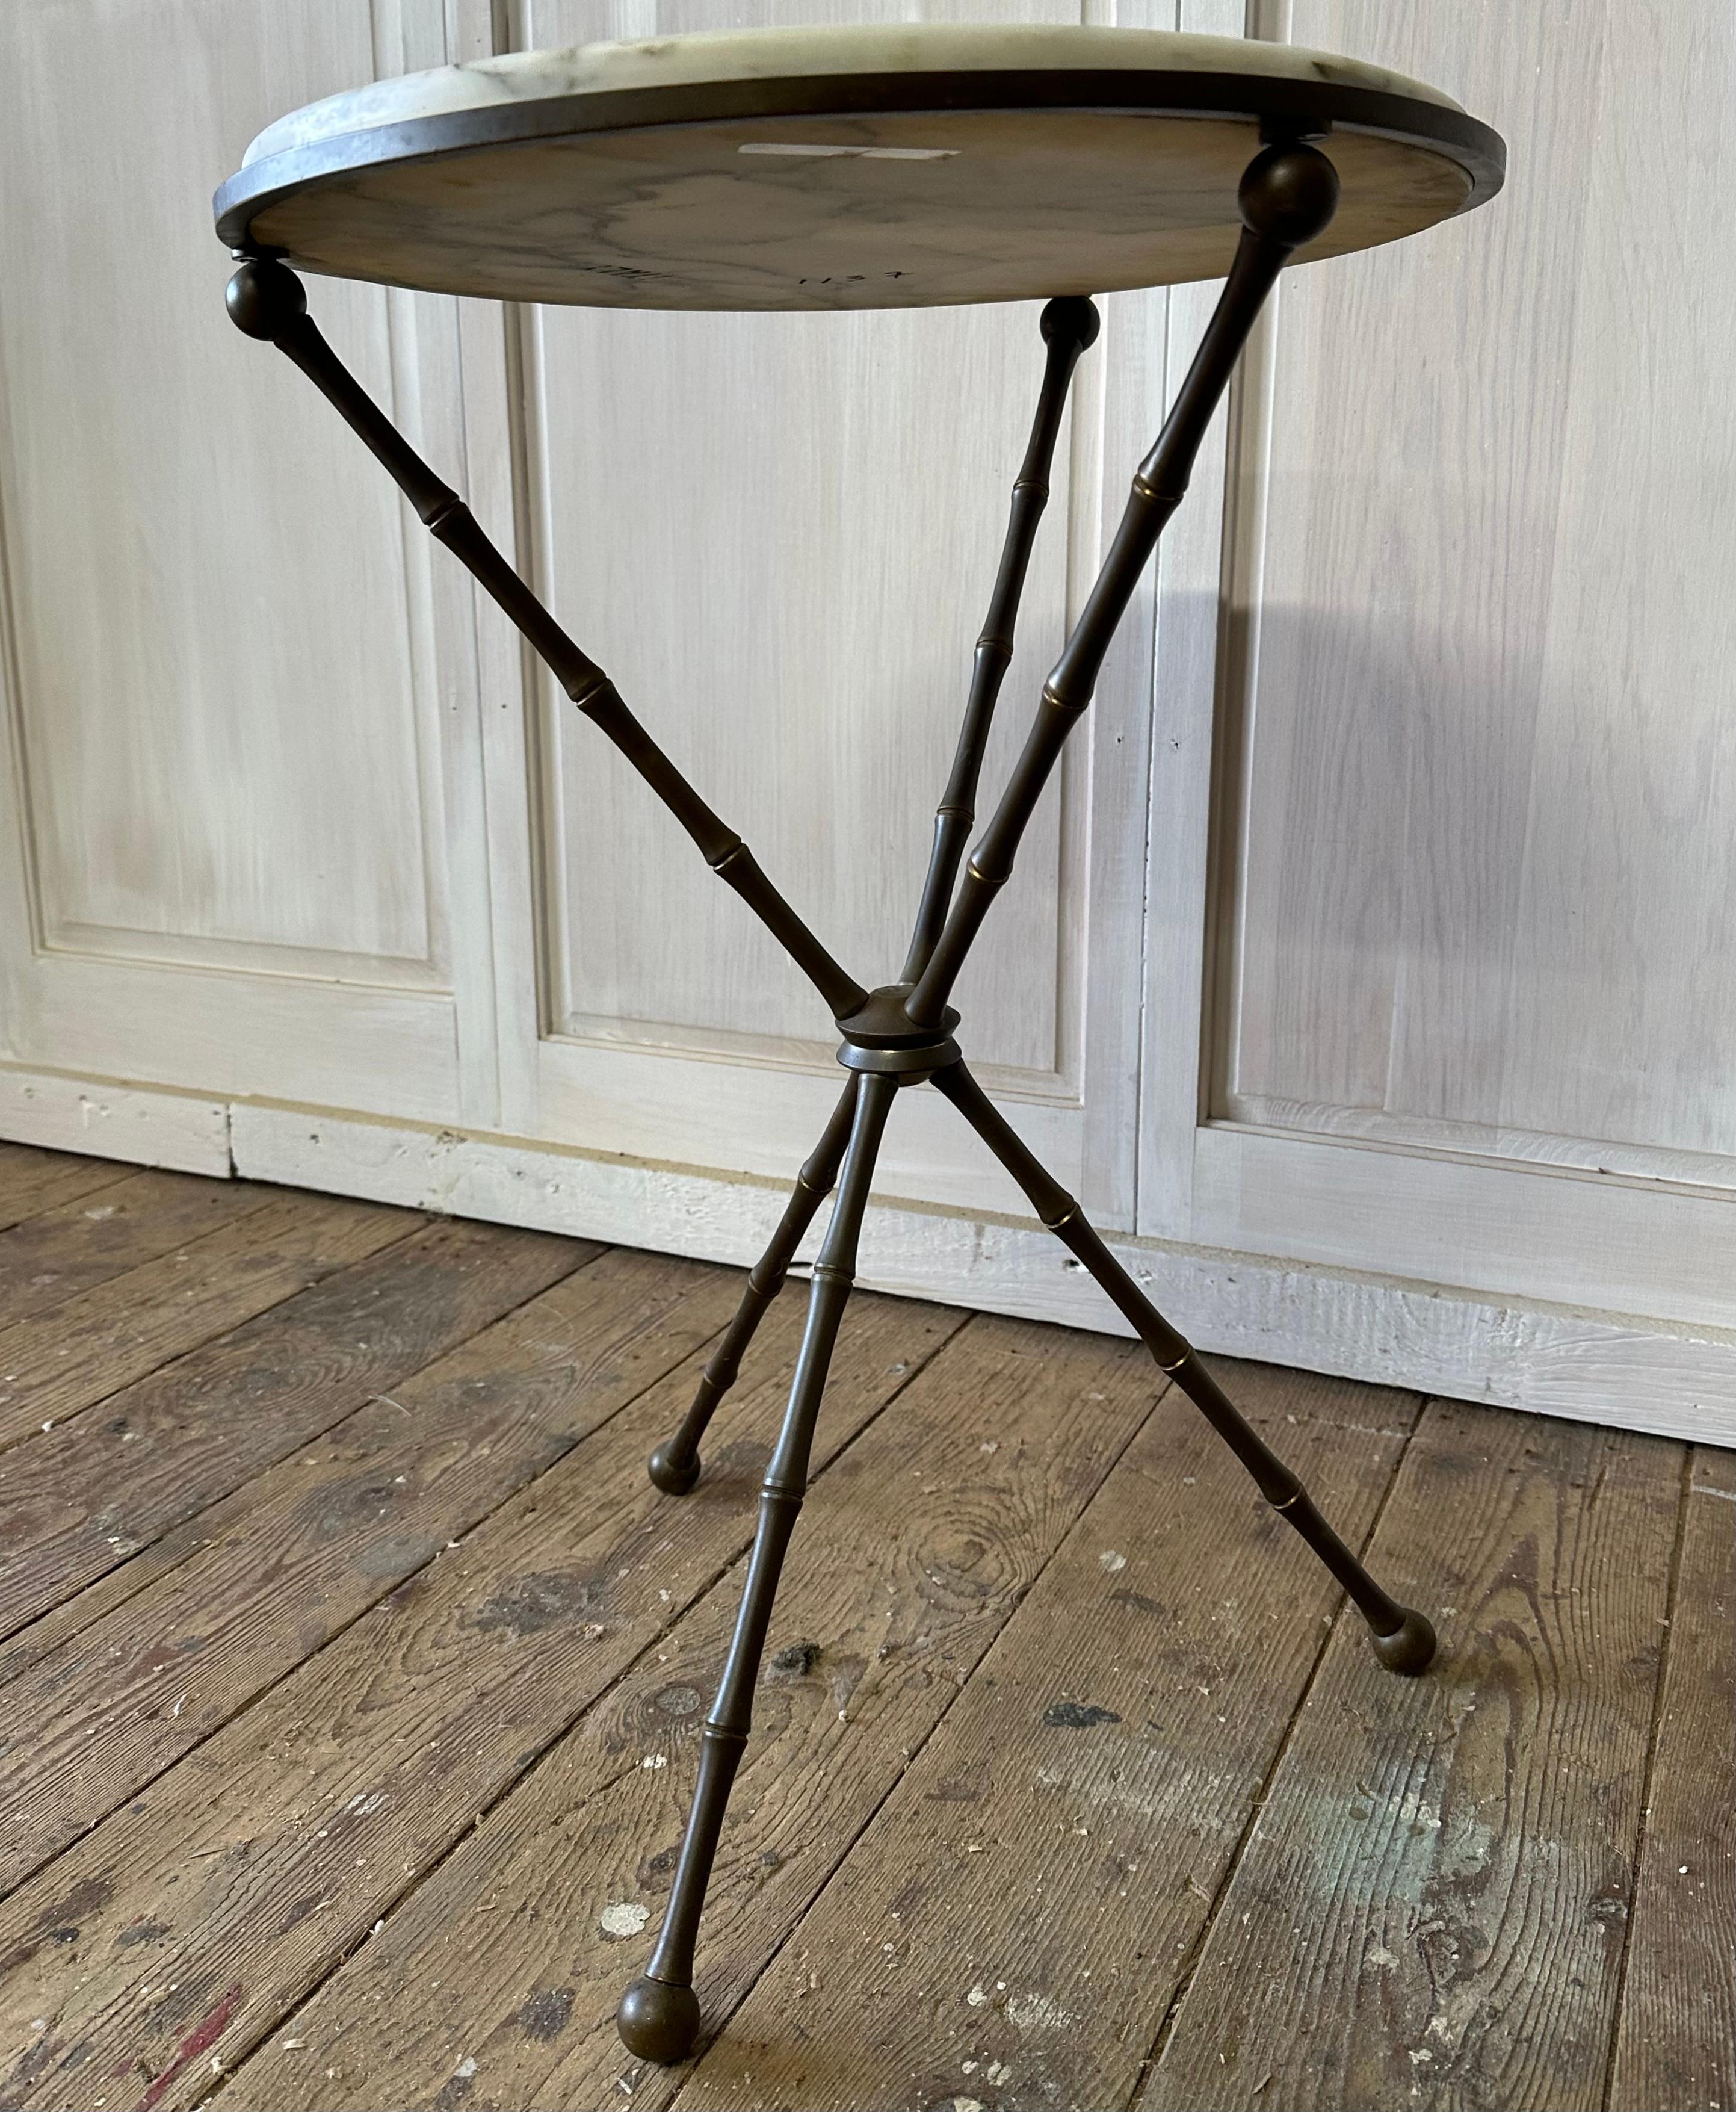 Round Italian white marble top sitting on tripod legs that have a faux bamboo design.  Can be used as a side table, end table, occasional wine table.
Mid-Century, Hollywood Regency